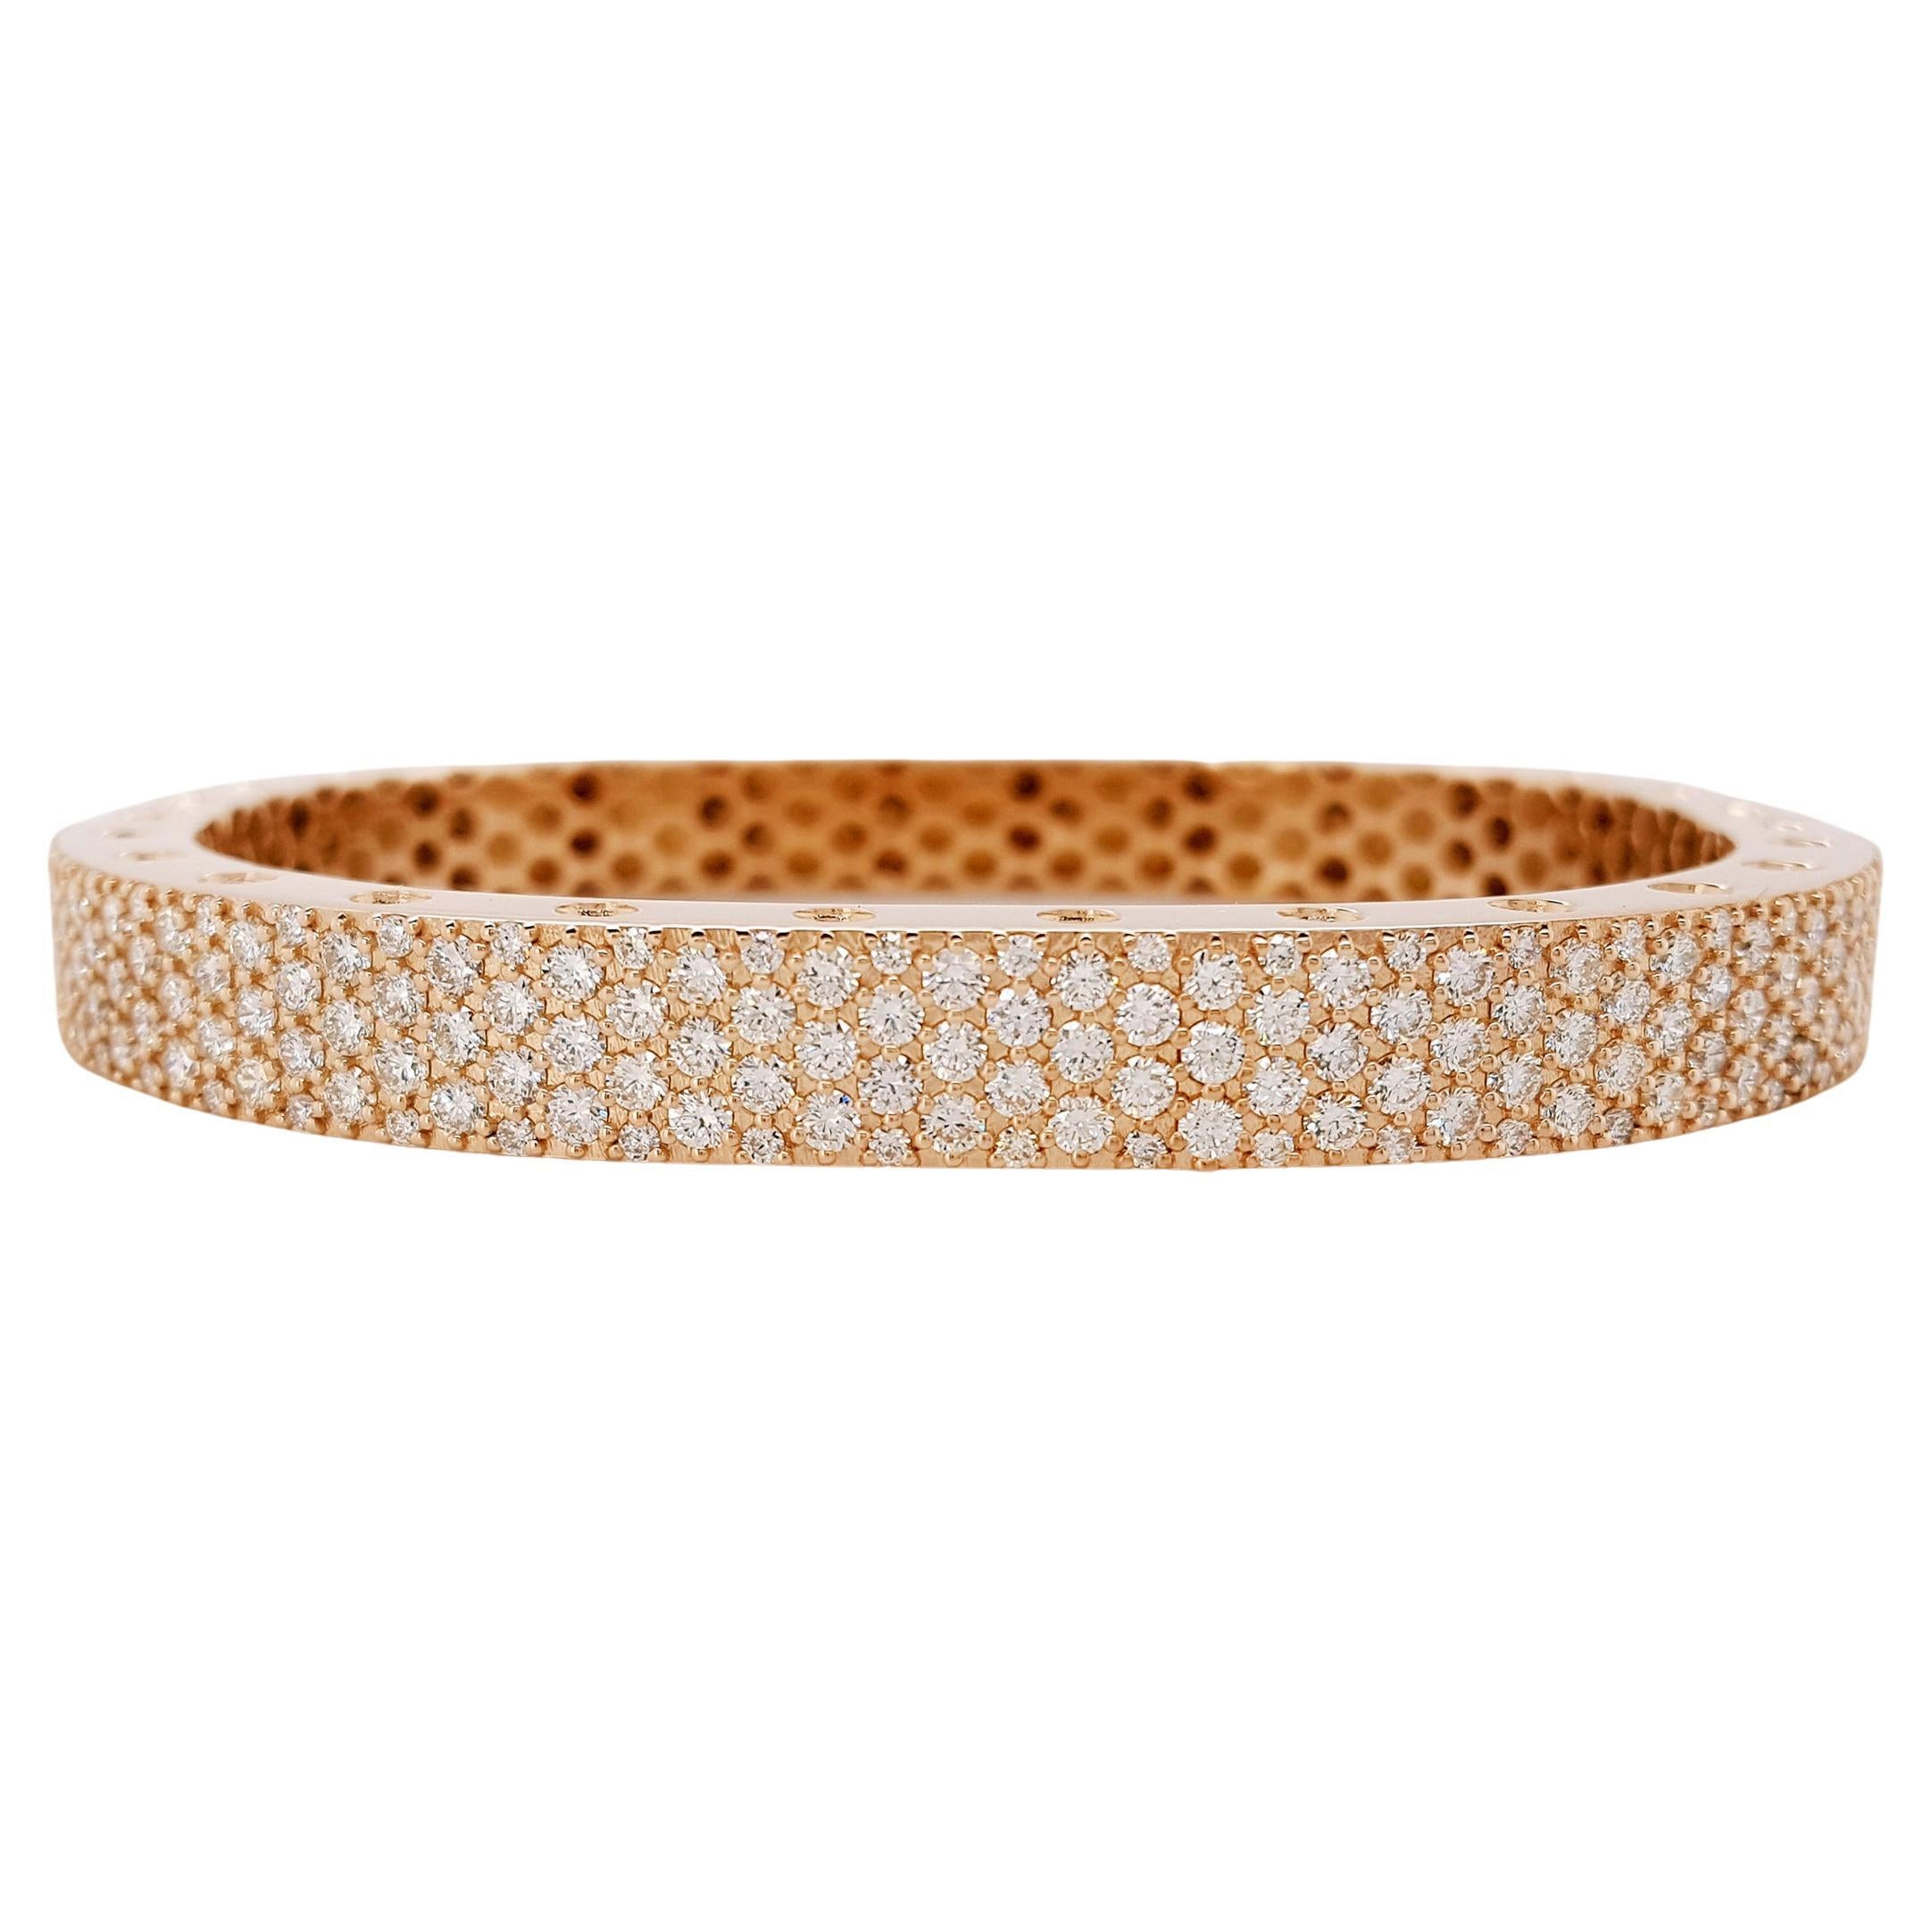 This stunning two section 18 karat rose gold bangle style bracelet is accented with 171 carefully matched white round brilliant diamonds weighing approximately 4.16 carat total. Inspired by art and fashion, Novel Collection is presenting its